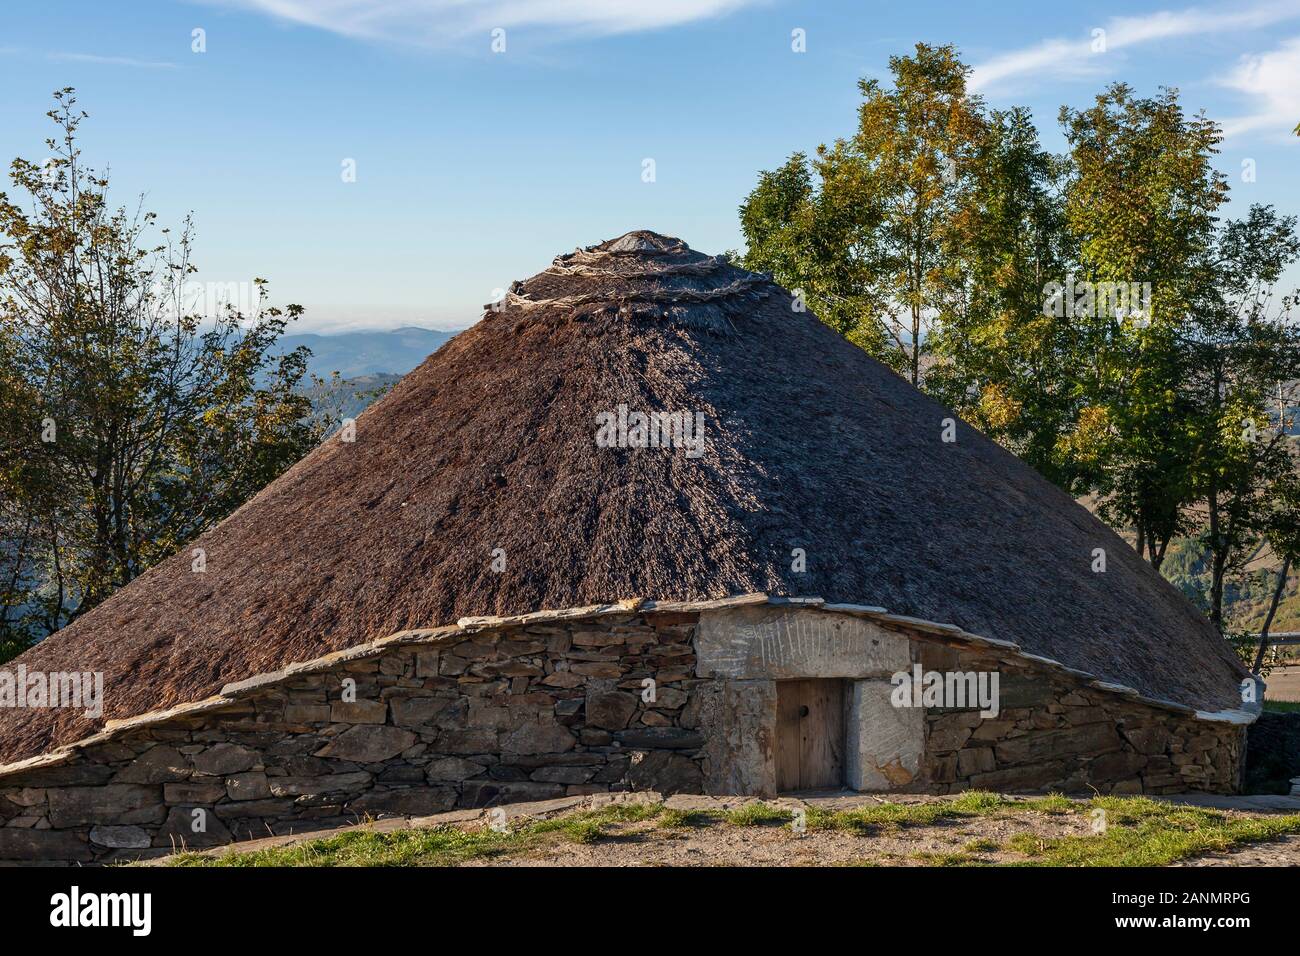 History and Drama play out in O Cebreiro Spain with historic Palloza houses and dramatic Galician Landscapes.  A stop on El Camino de Santiago, Spain. Stock Photo